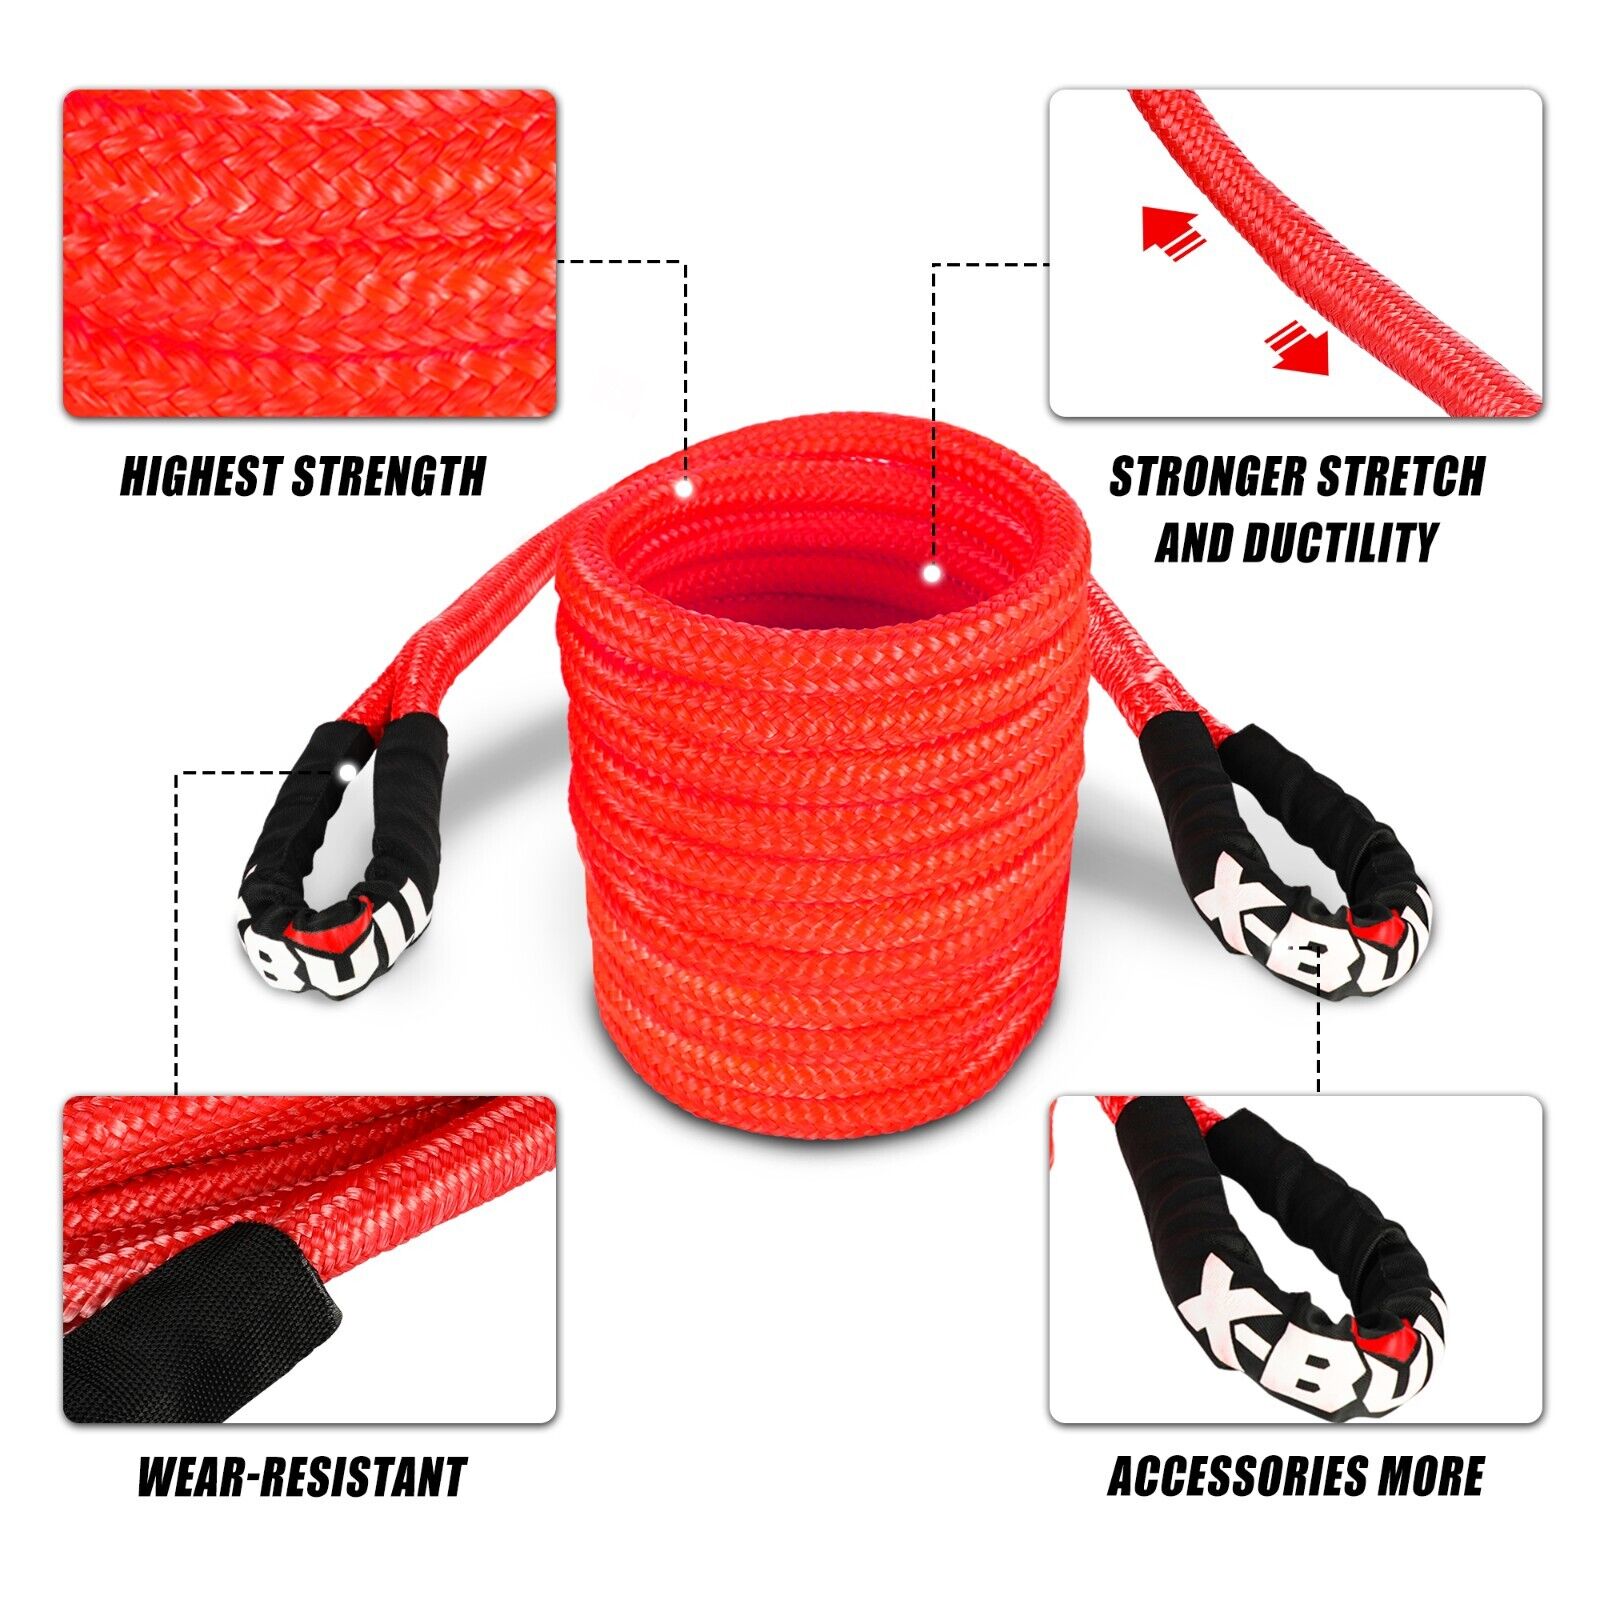 X-BULL Kinetic Recovery Rope 25mm x9mm Snatch Snap Recovery Kit Dneema Tow Winch